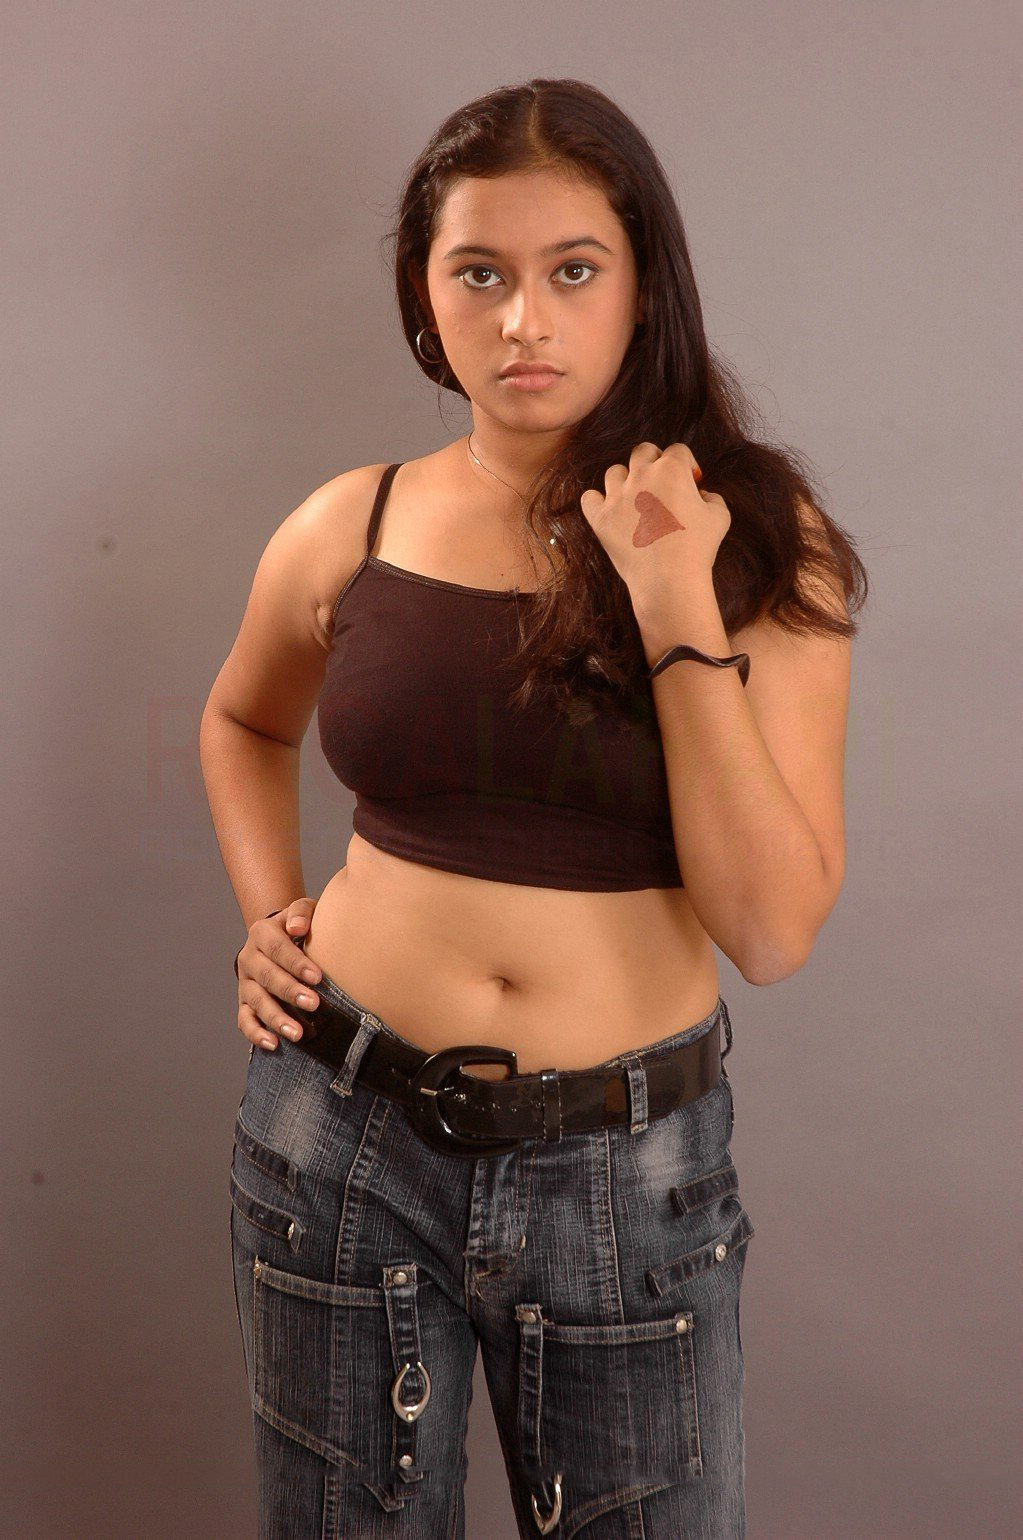 Telugu film actress Sree Divya's some old and unseen pictures where sh...